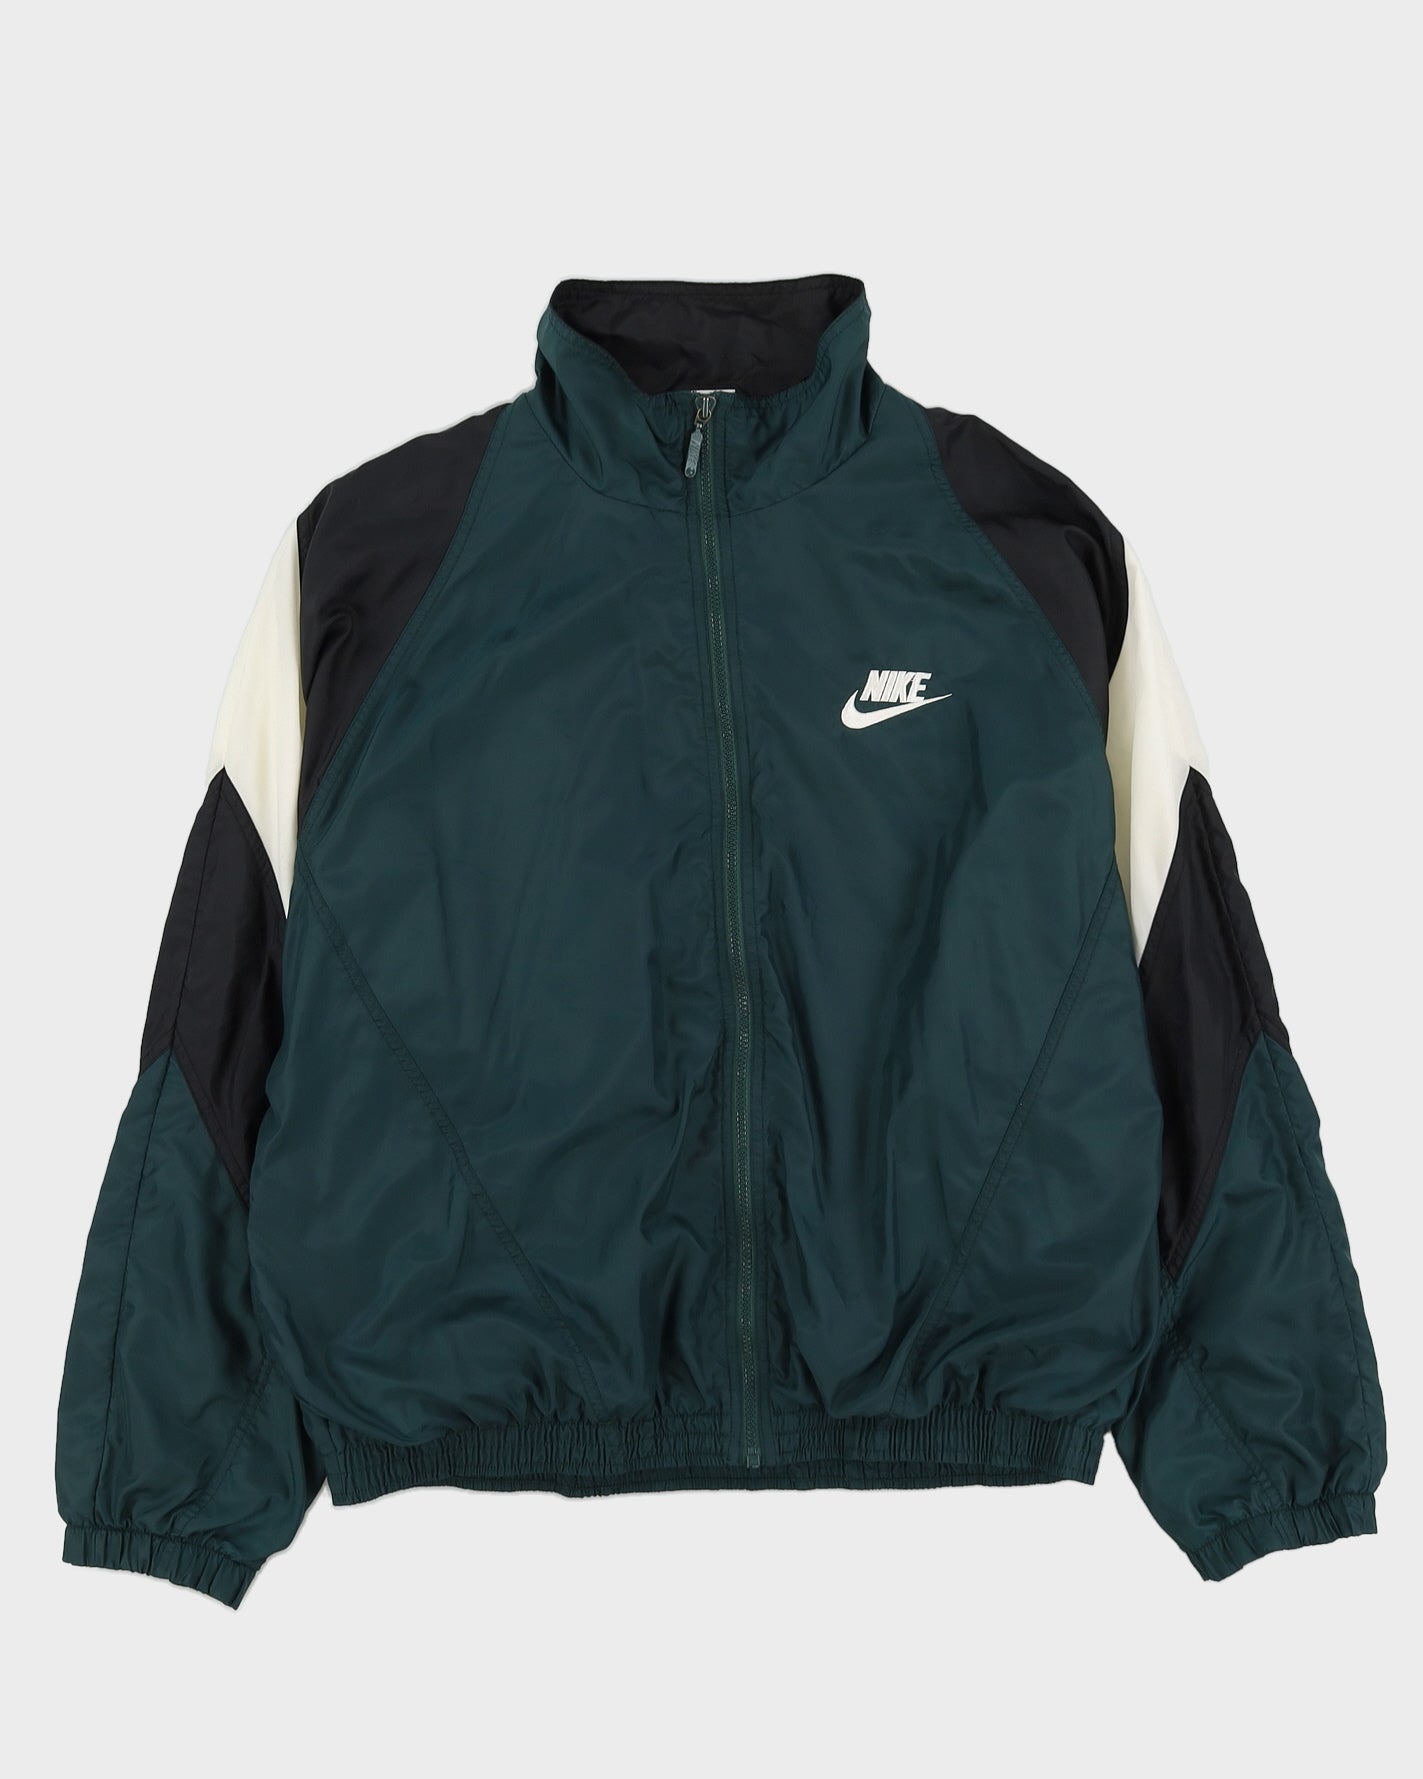 Vintage 90s Nike Green Track Jacket With Embroidery - L